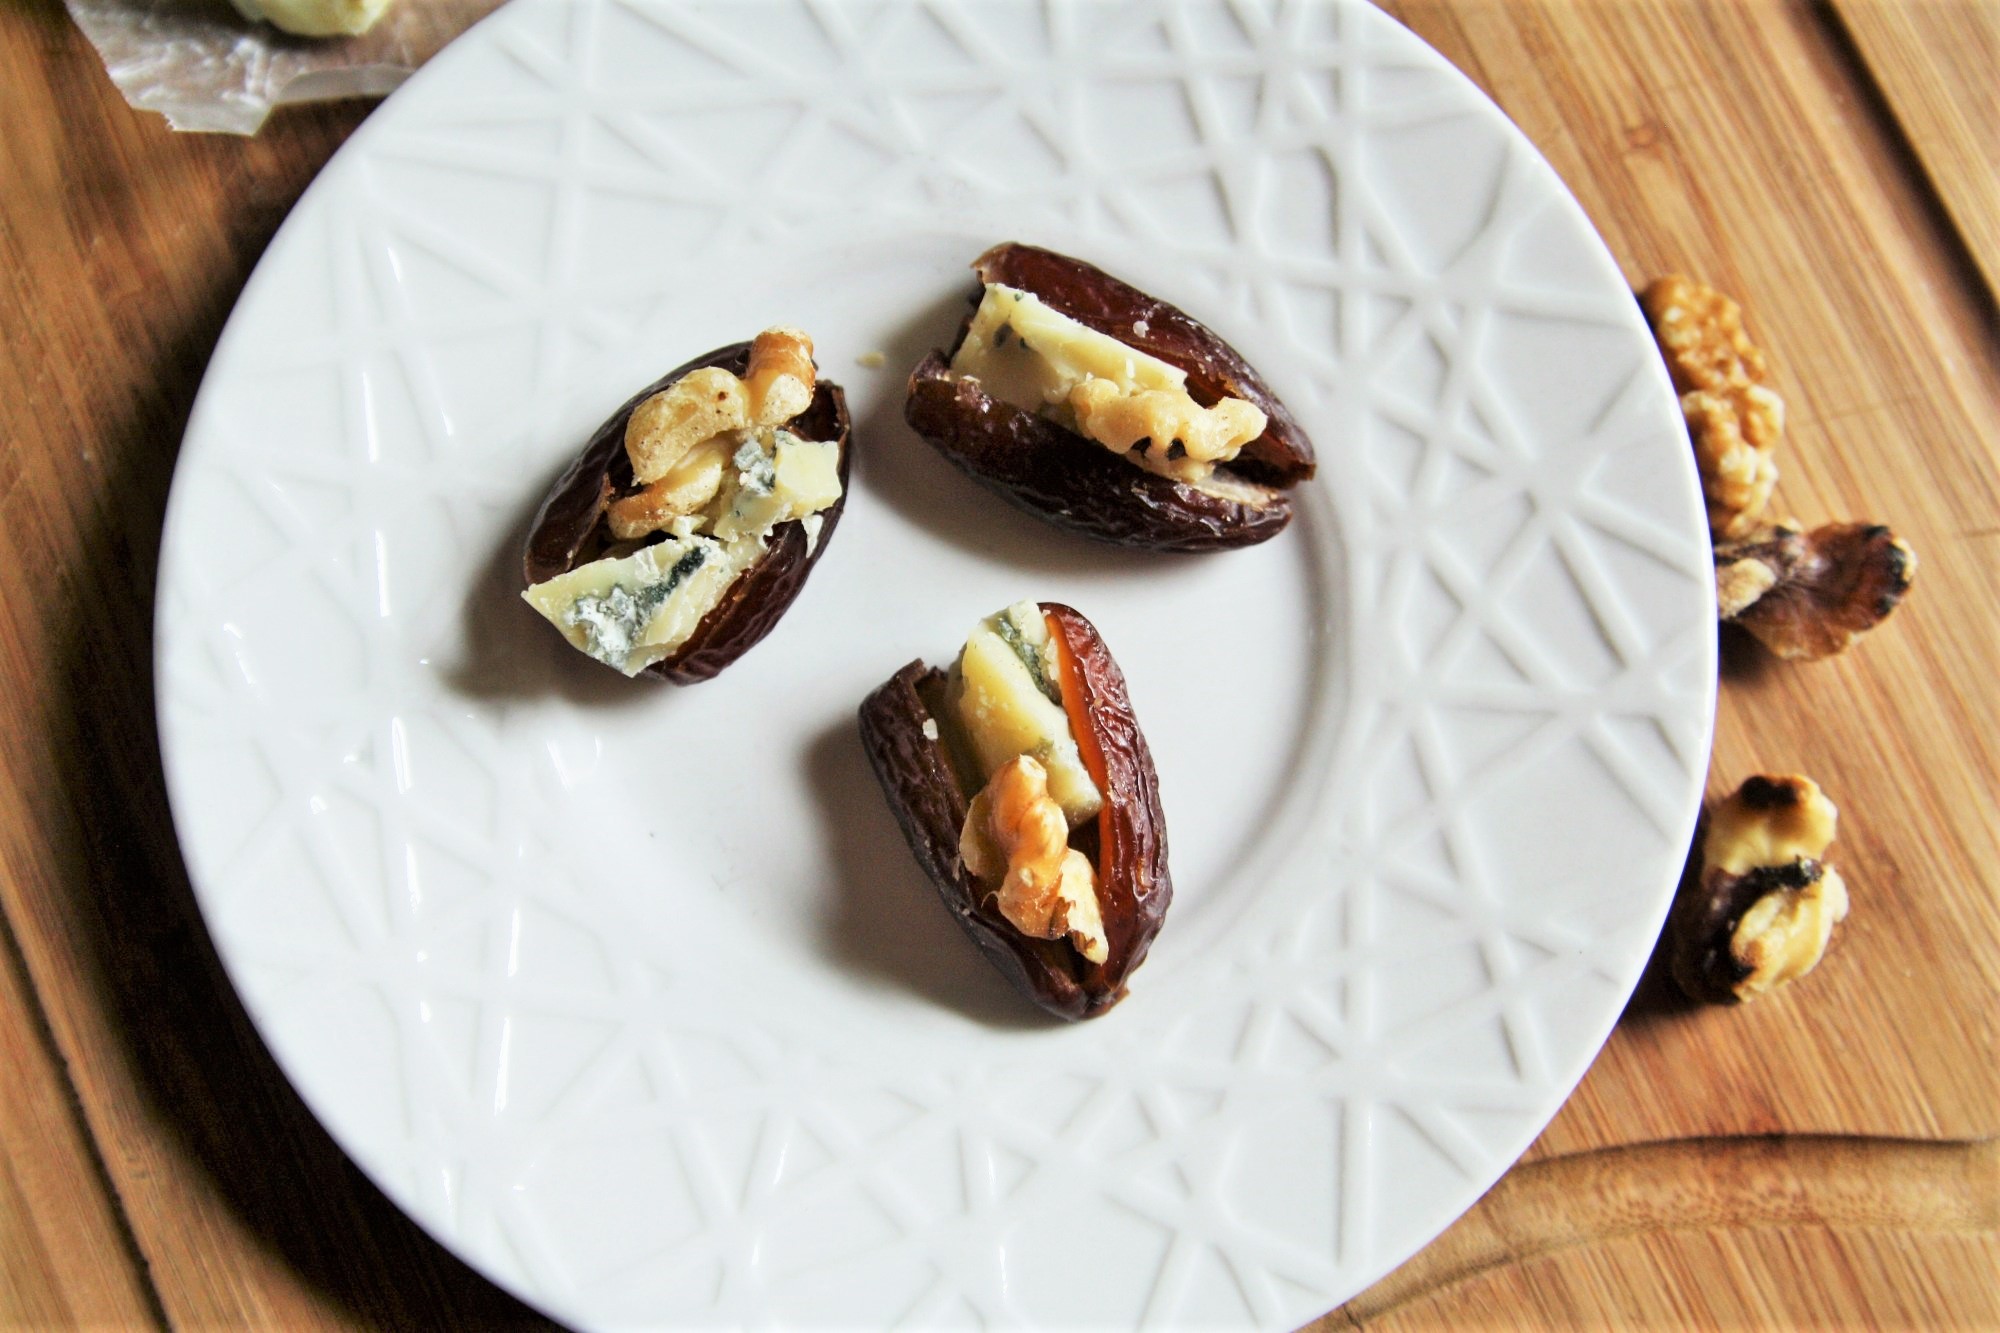 These Blue Cheese and Walnut Stuffed Dates are one those effortless appetizers that never fail to impress - simple, elegant, and the perfect combination of sweet and savory flavors!